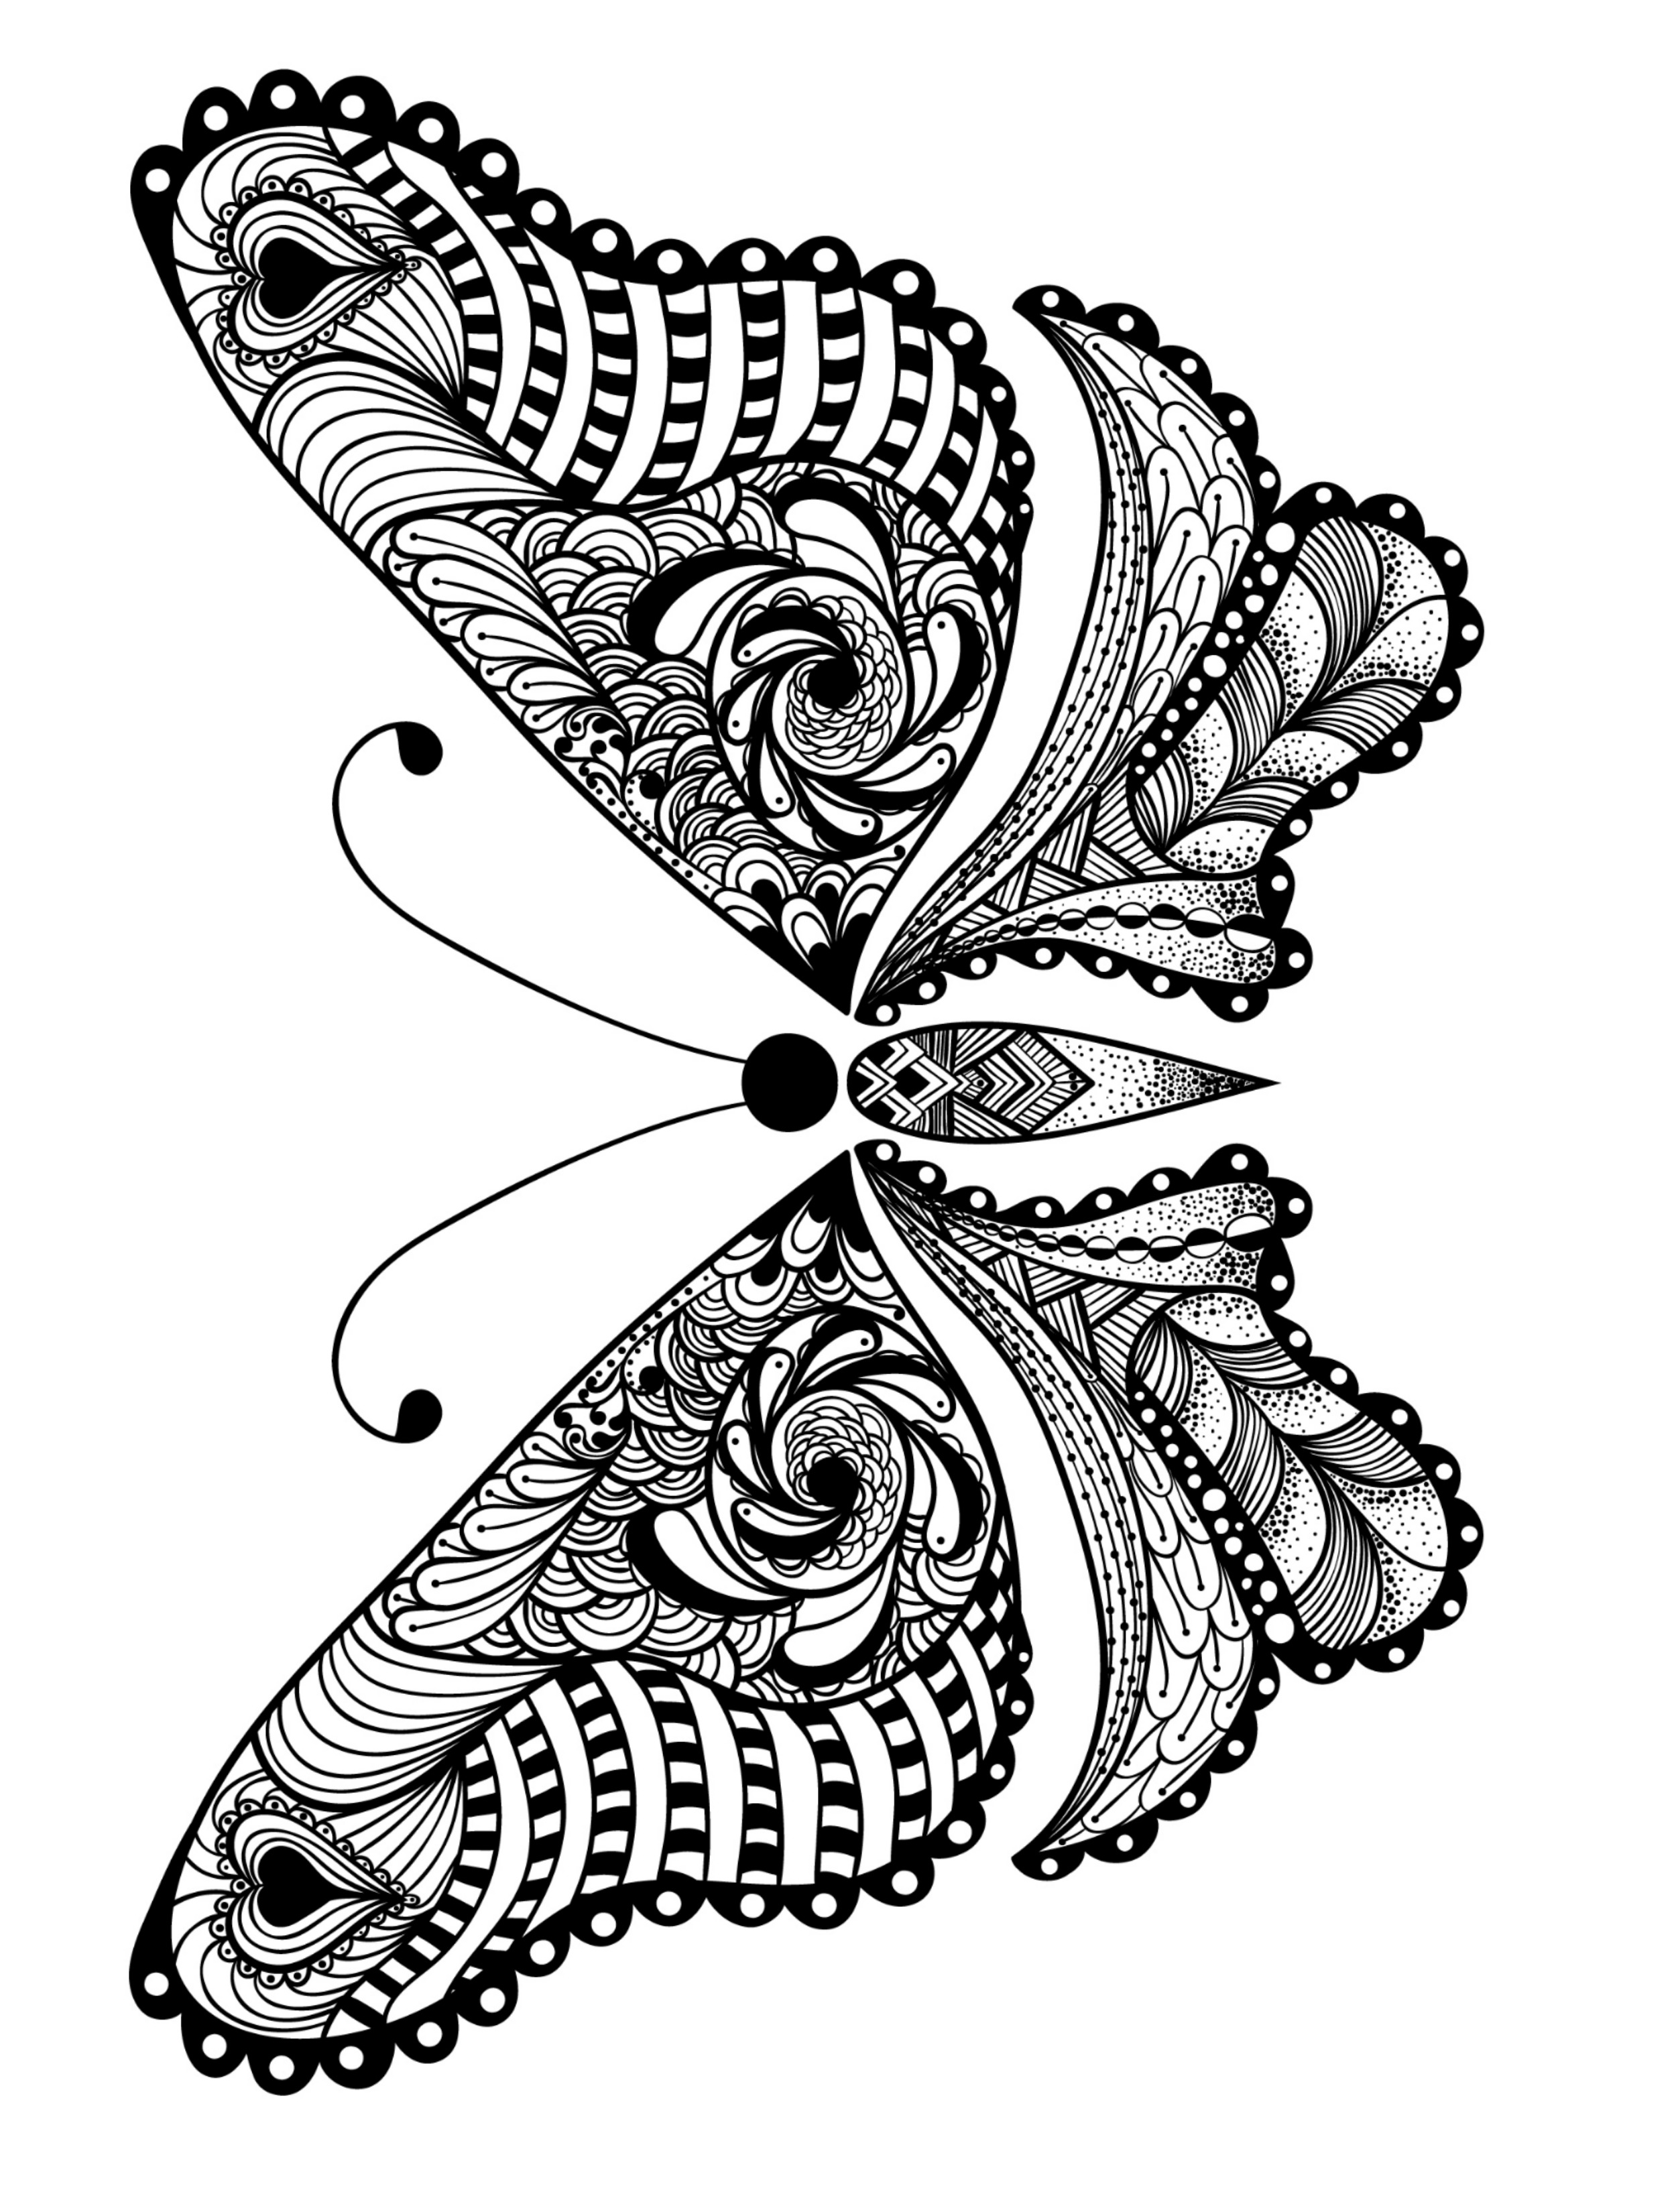 8300 Printable Coloring Pages For Adults Images & Pictures In HD